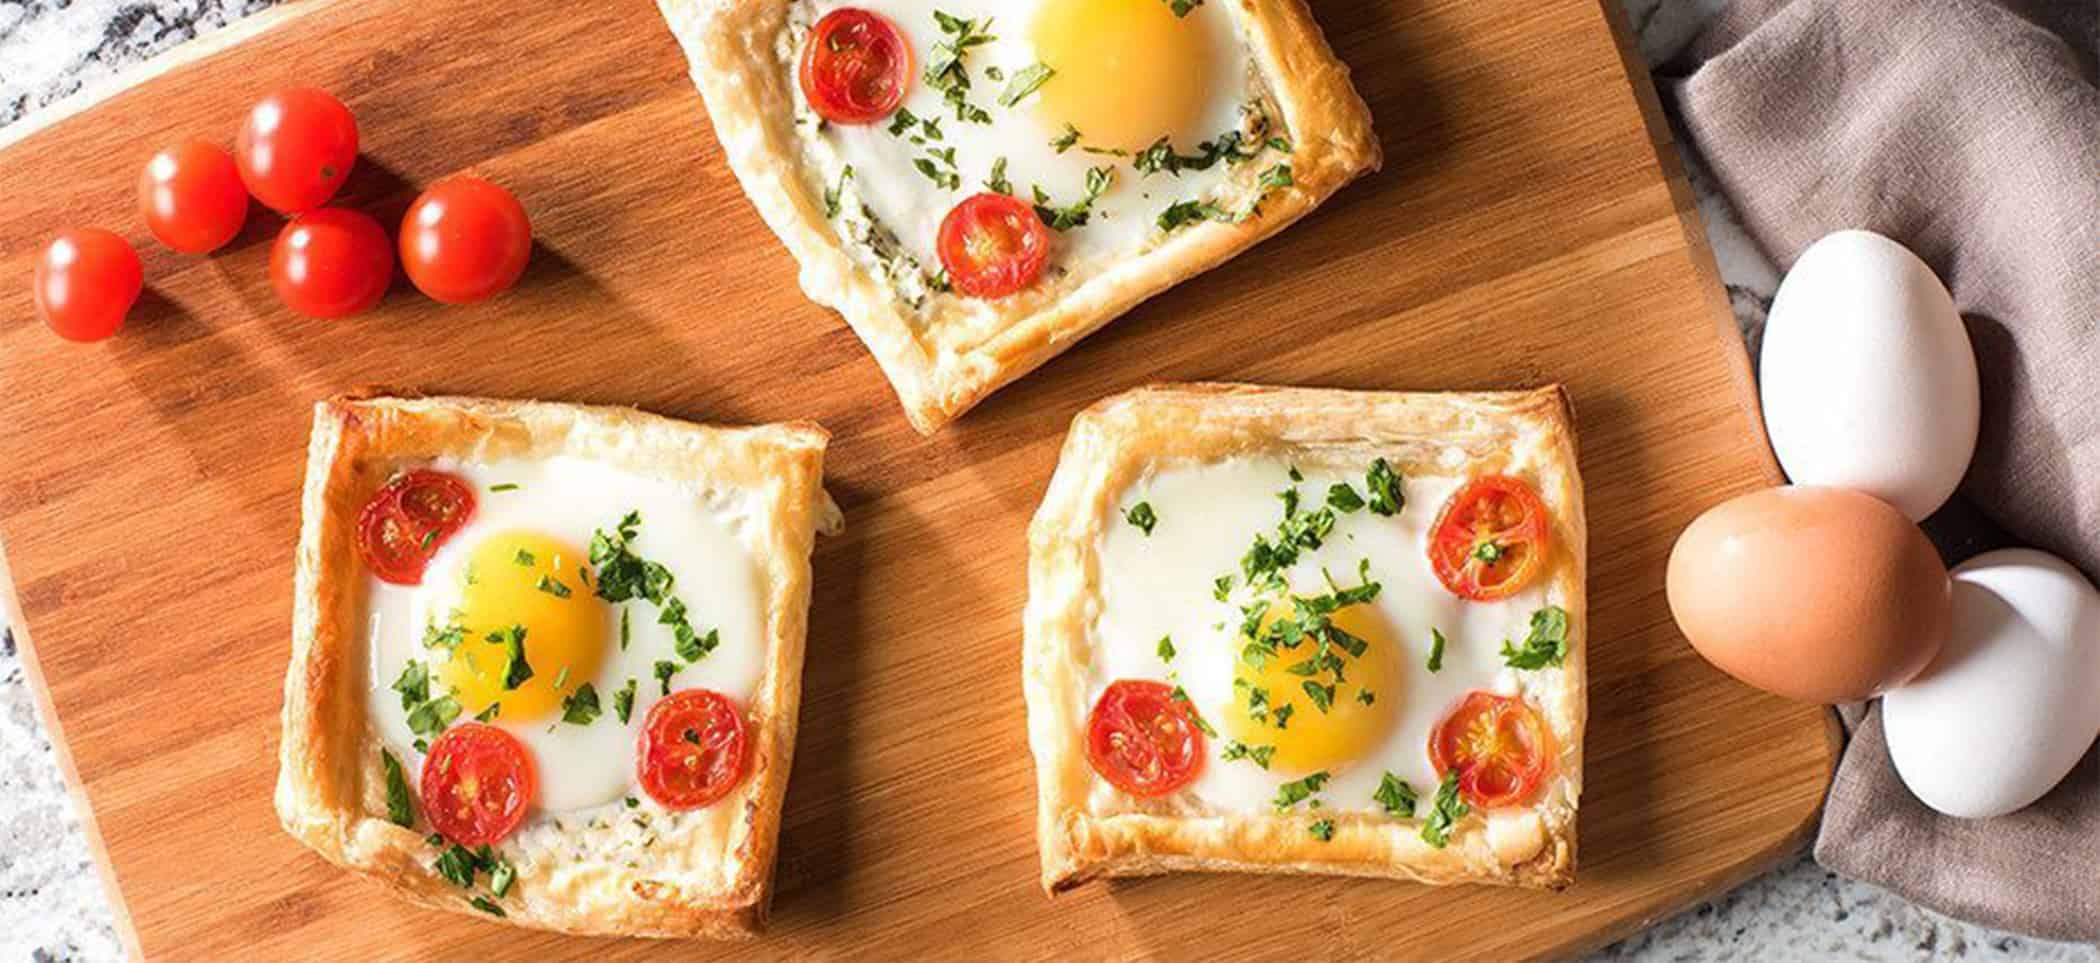 Puff Pastry Galettes with Eggs